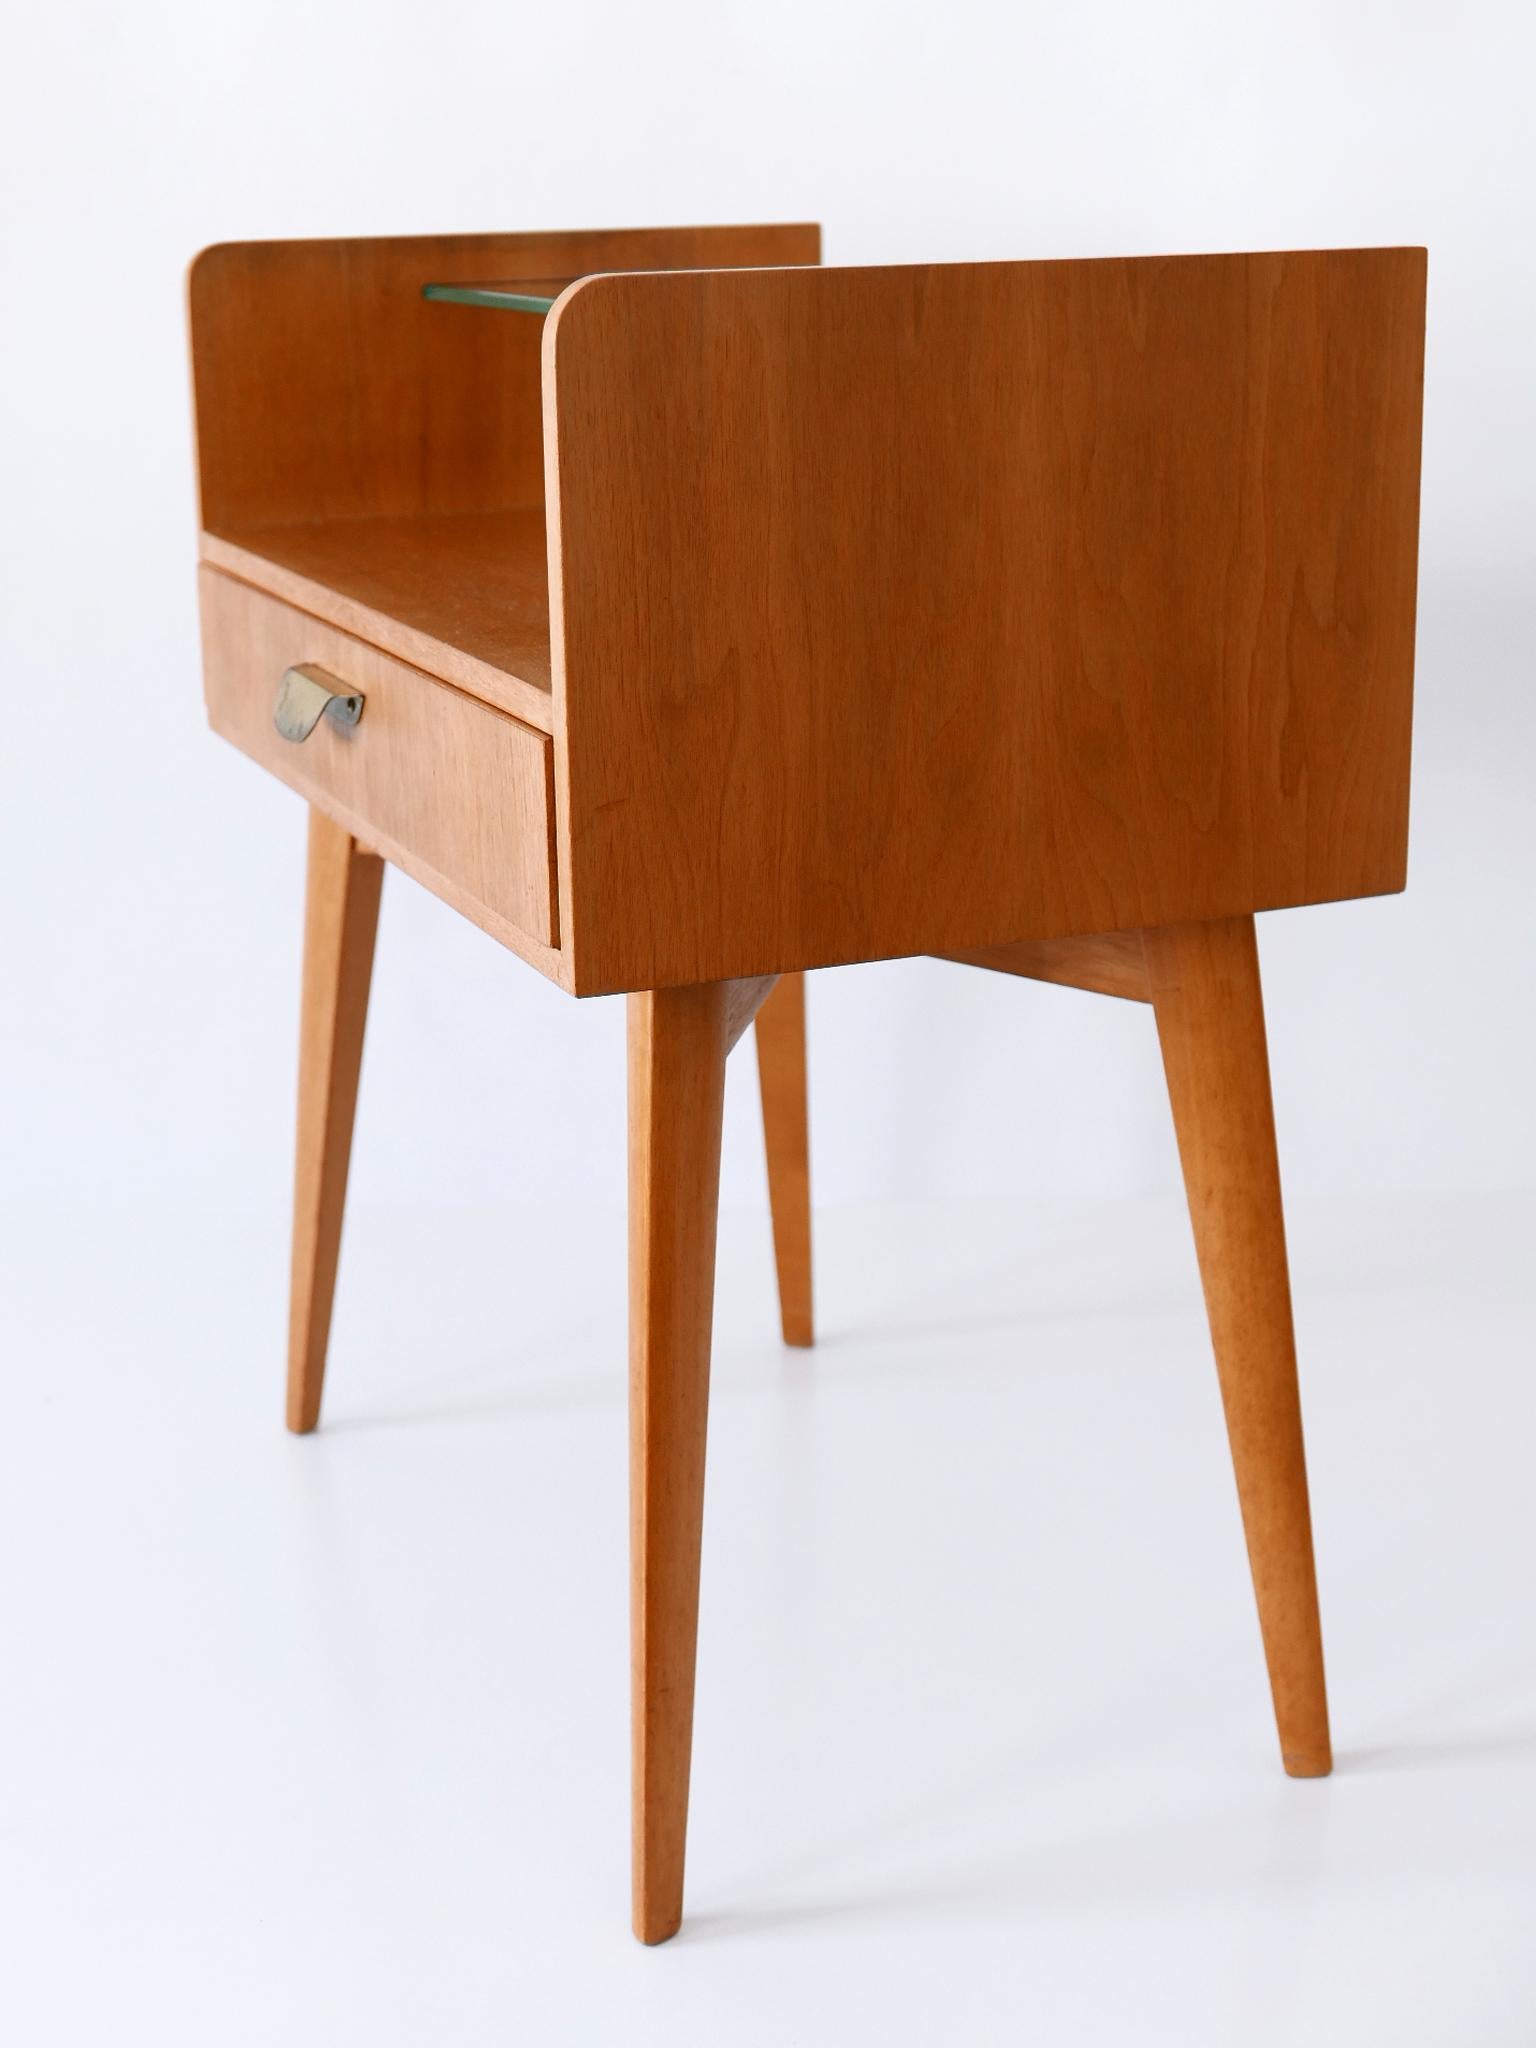 Set of Two Mid Century Modern Walnut Nightstands by WK Möbel Germany 1950s For Sale 1